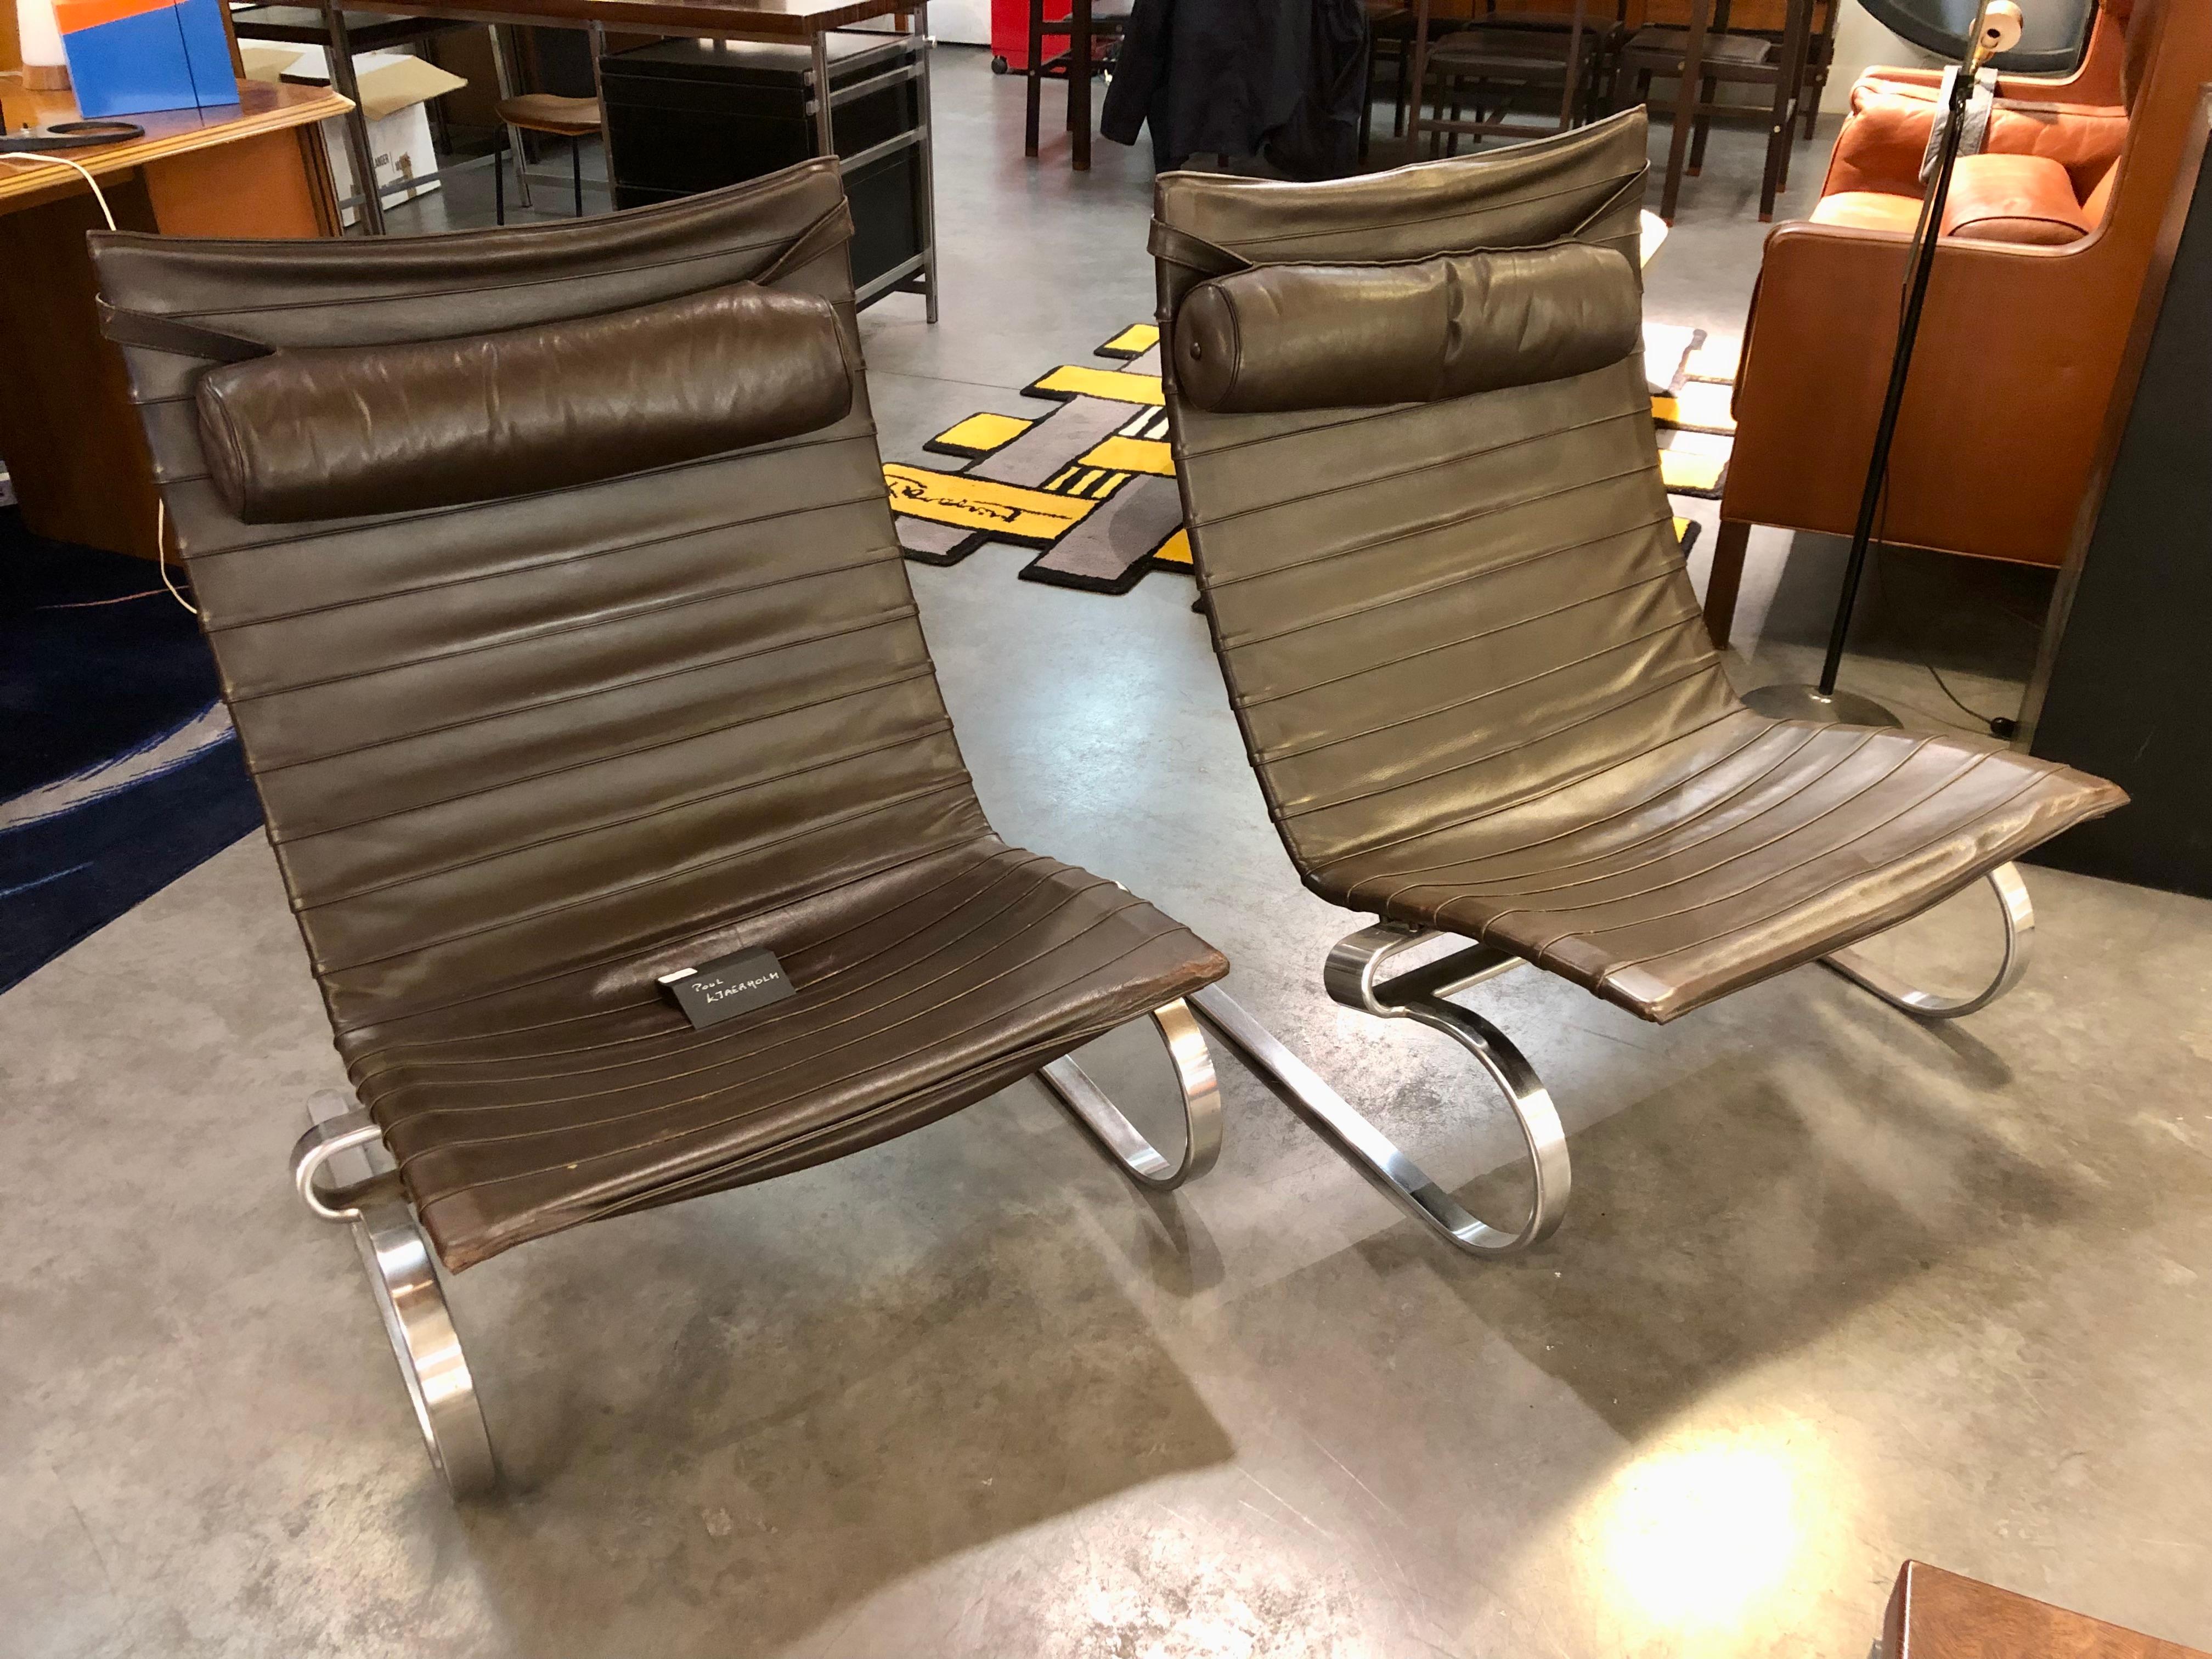 Pair of early pk 20 by Poul Kjaerholm for Kold Kristensen in Brouwn leather and metal.
Stamped with the Kristensen label in the metal structure.
They are in good condition with original leather .
Some nice patina and some small scratches on the